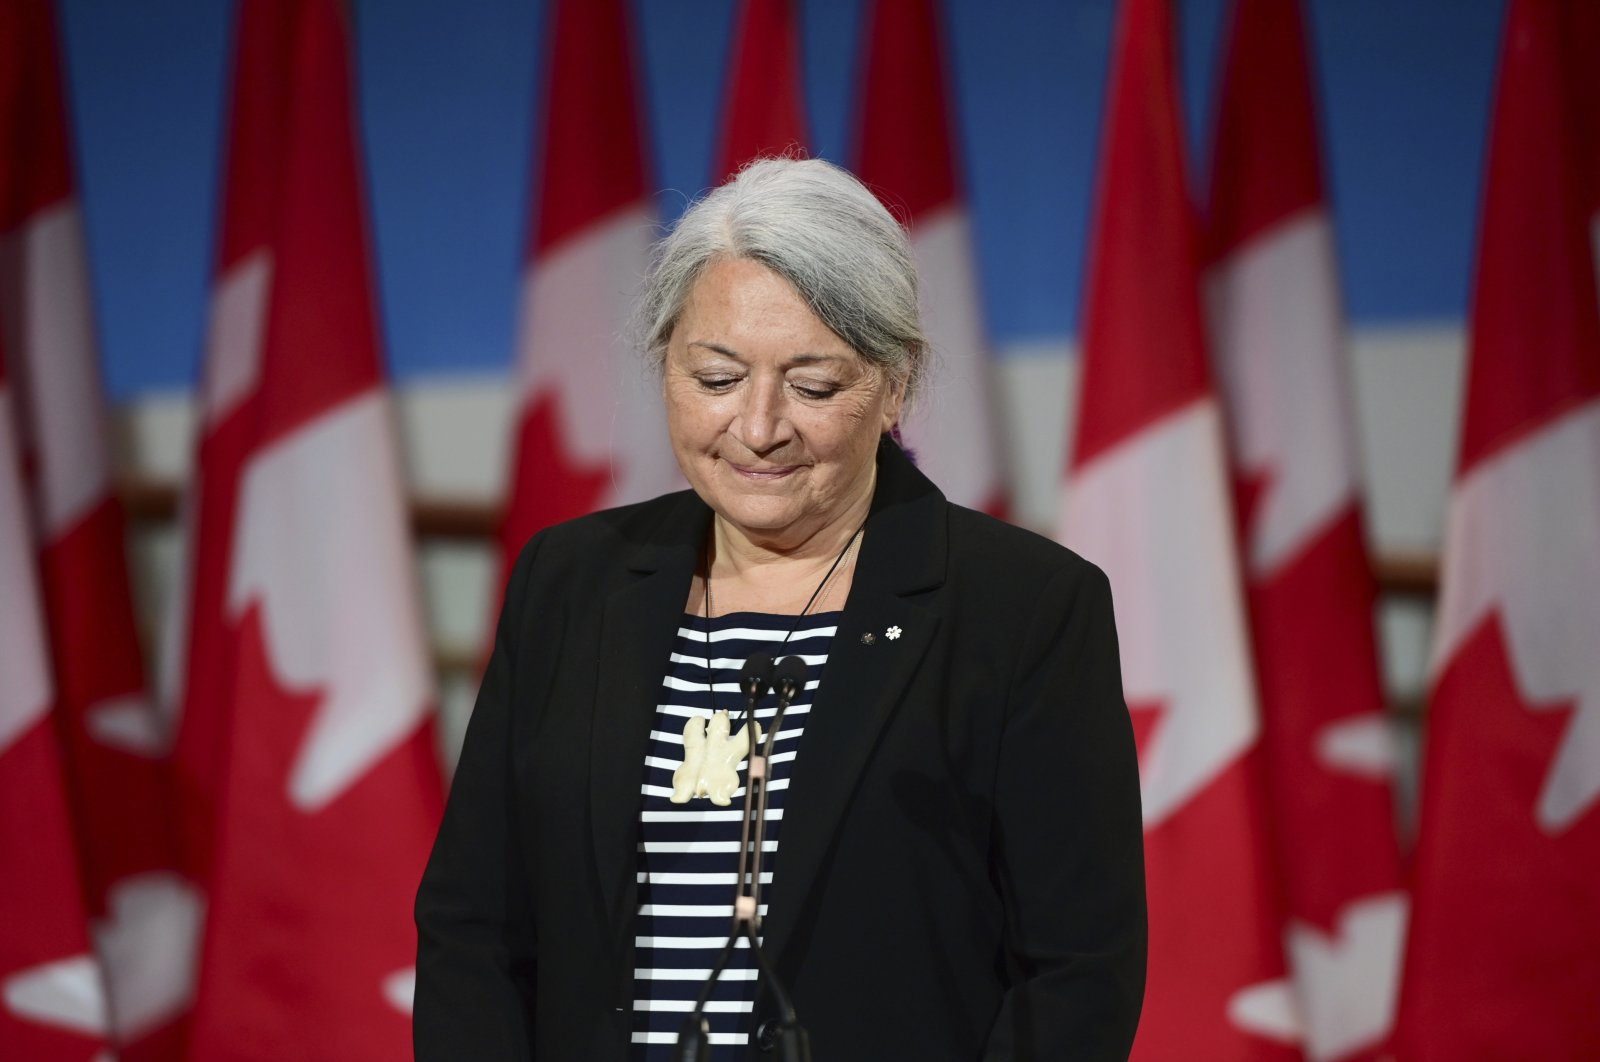 Mary Simon speaks during an announcement at the Canadian Museum of History in Gatineau, Quebec, Canada, July 6, 2021. (The Canadian Press via AP)